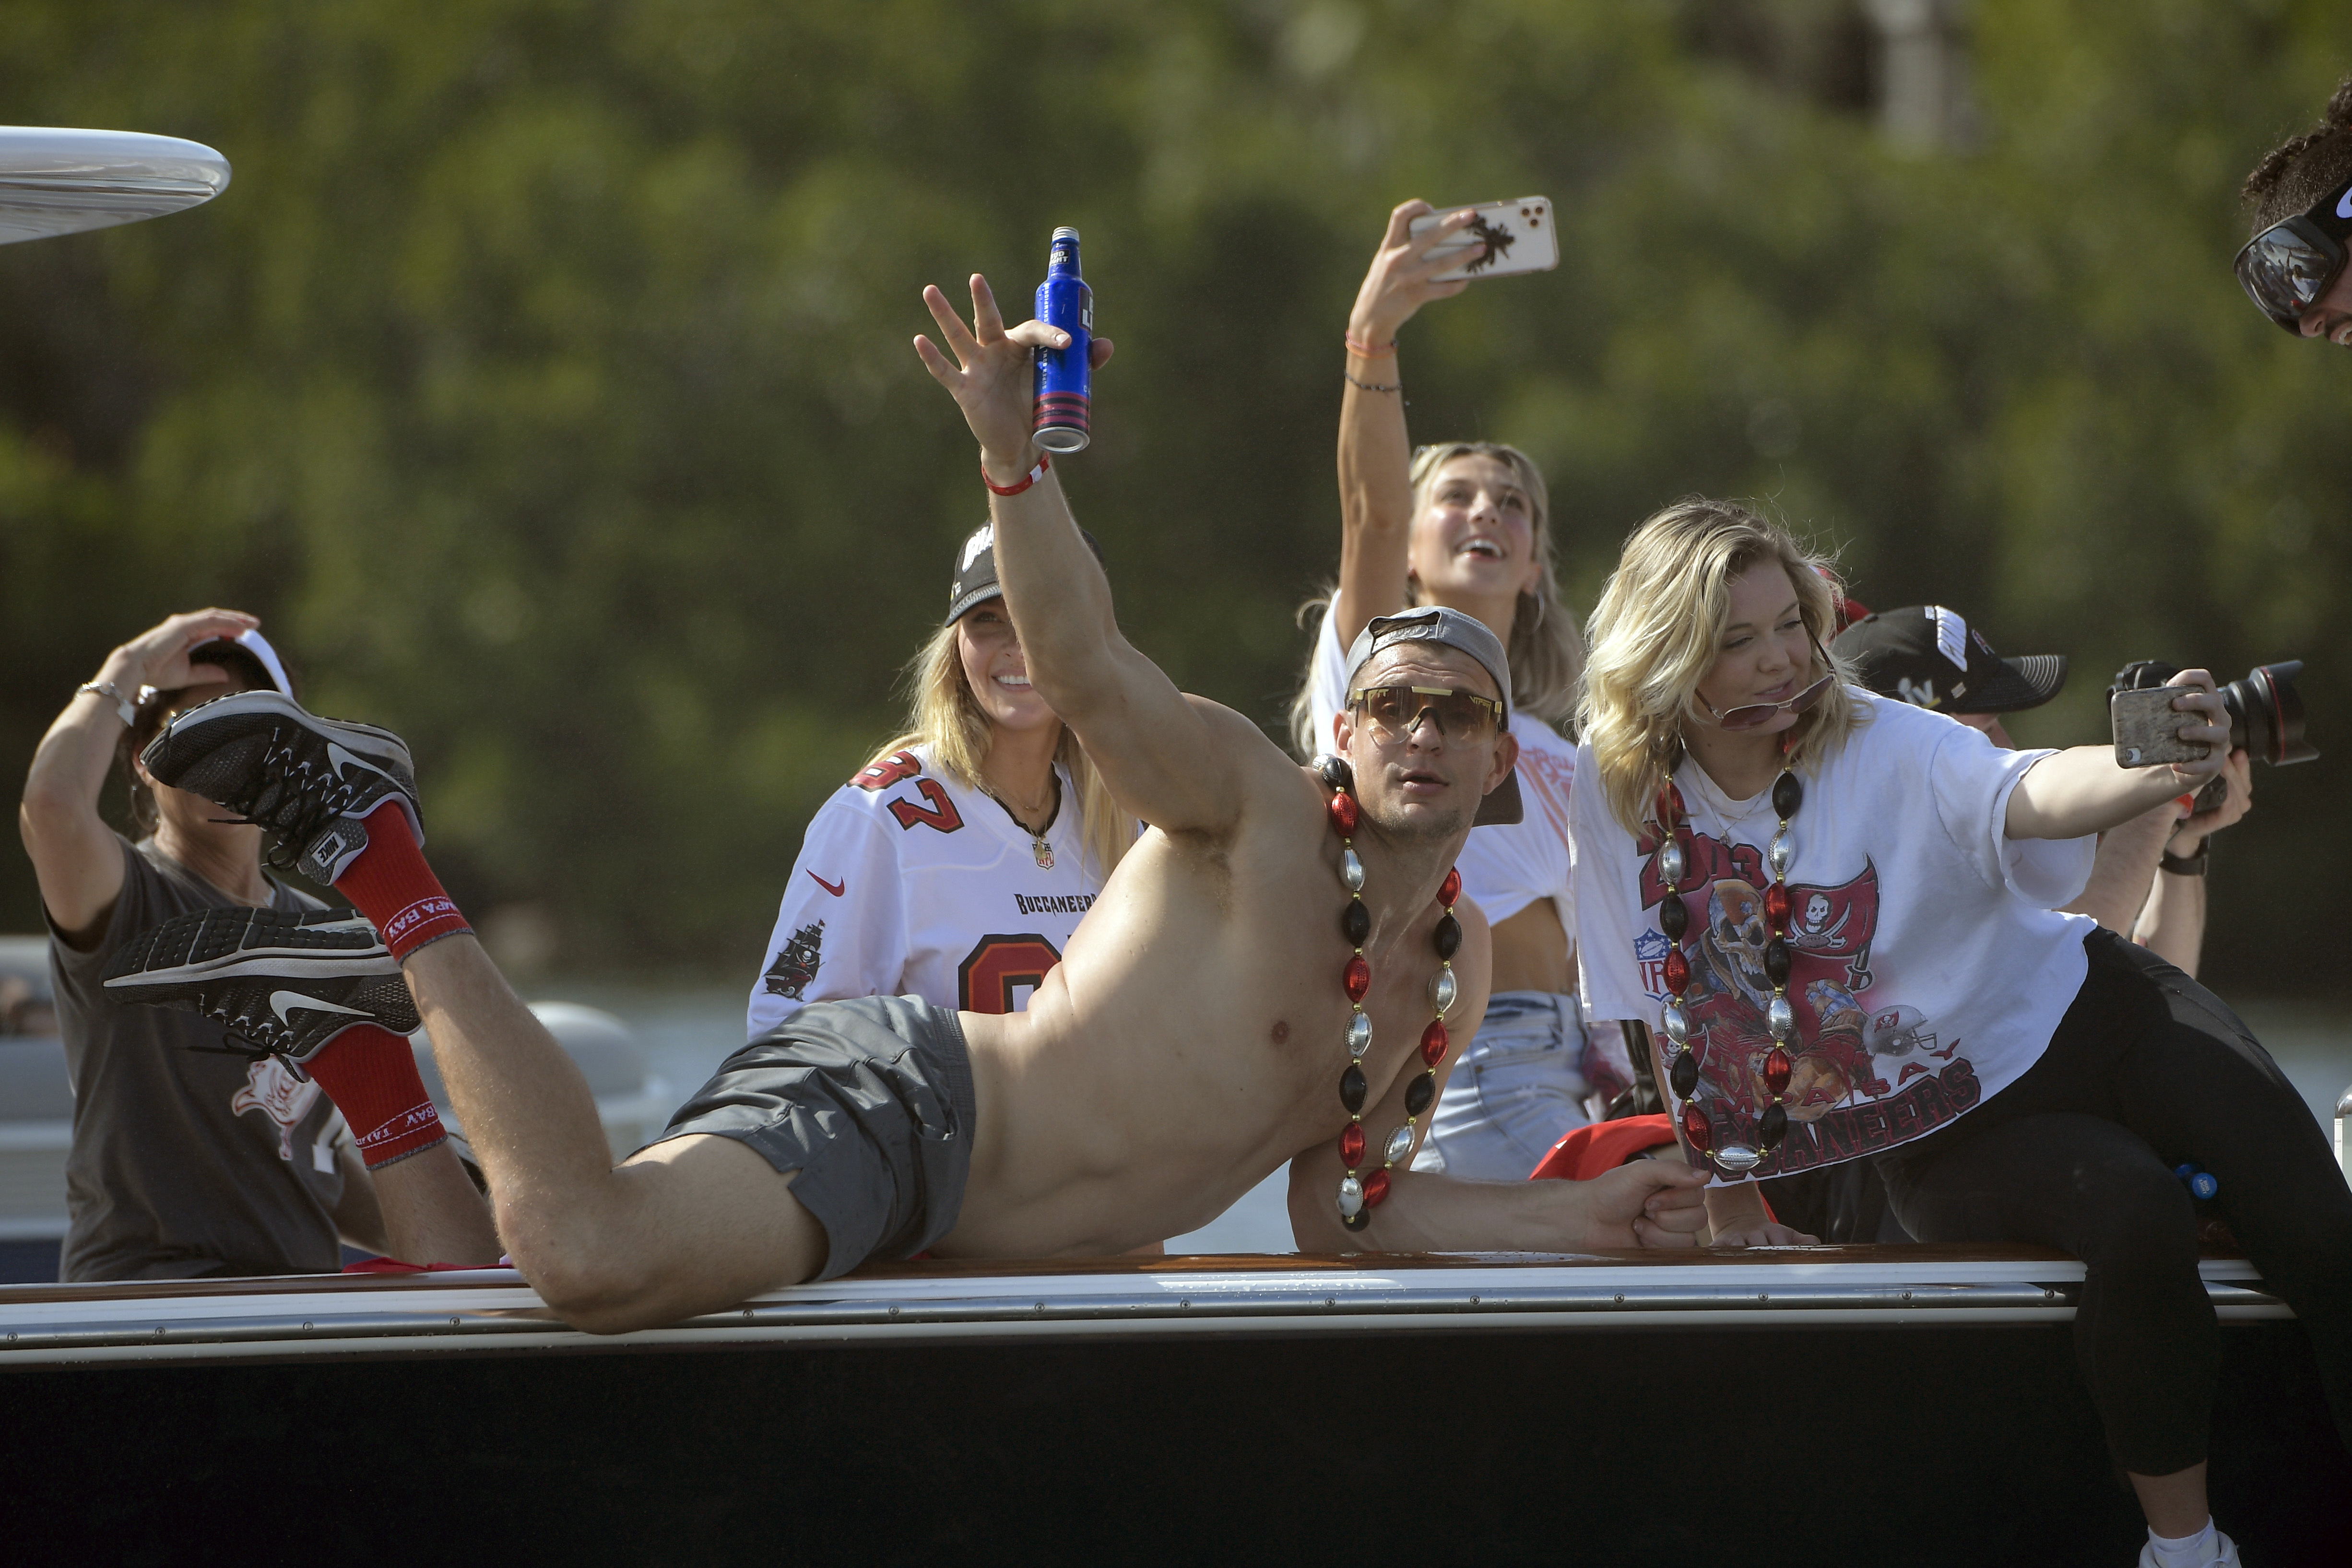 Photos: Bucs celebrate Super Bowl win with Tampa boat parade